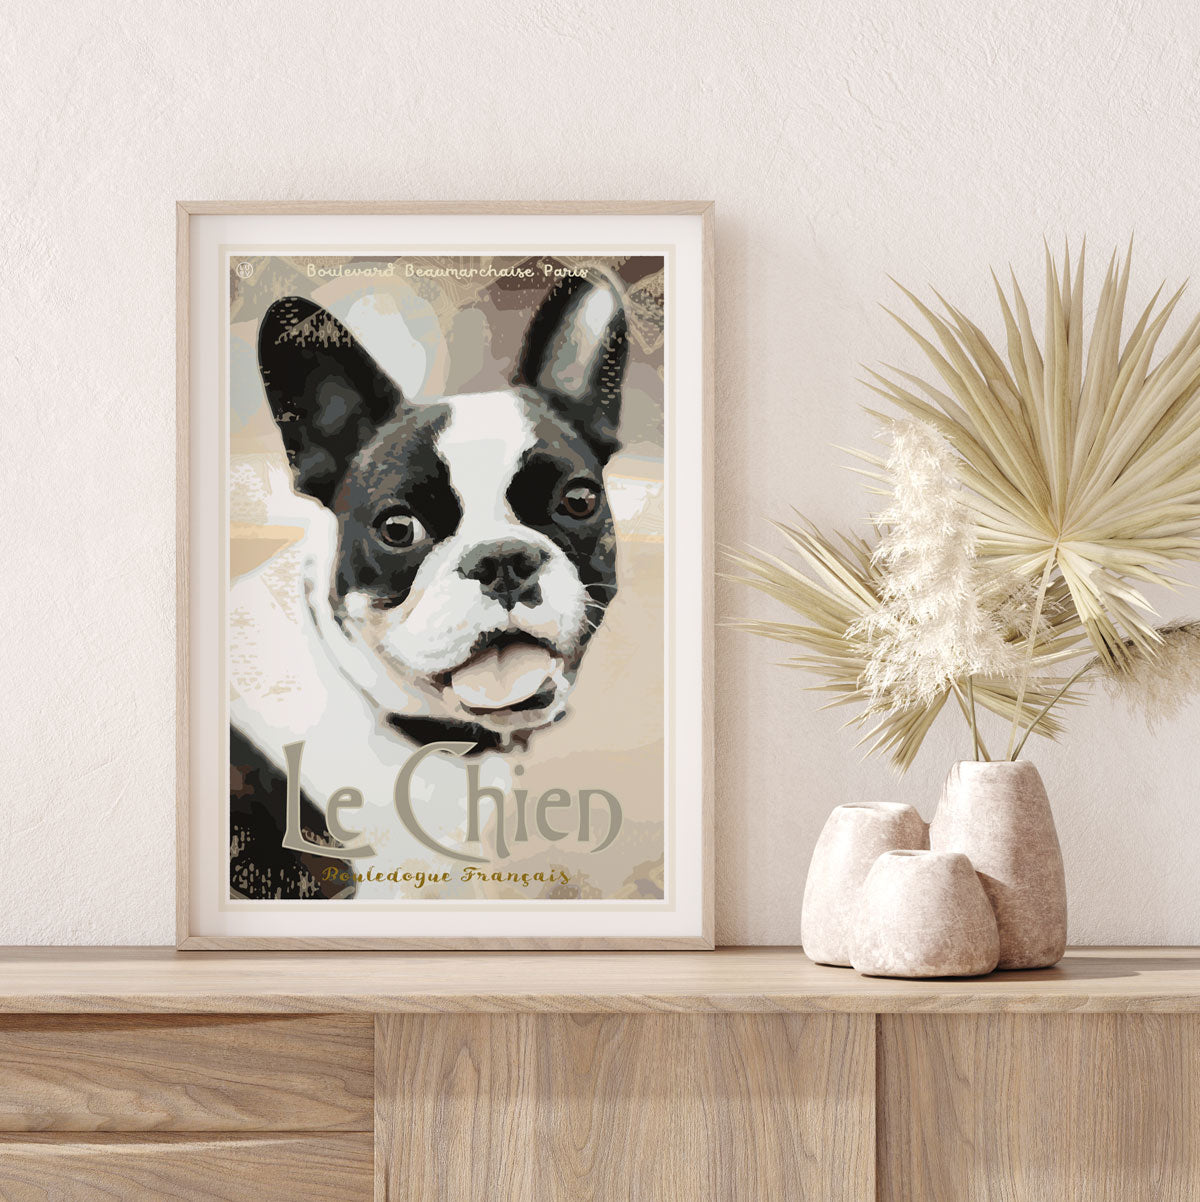 Le Chien french bulldog Paris framed travel print by places we luv 